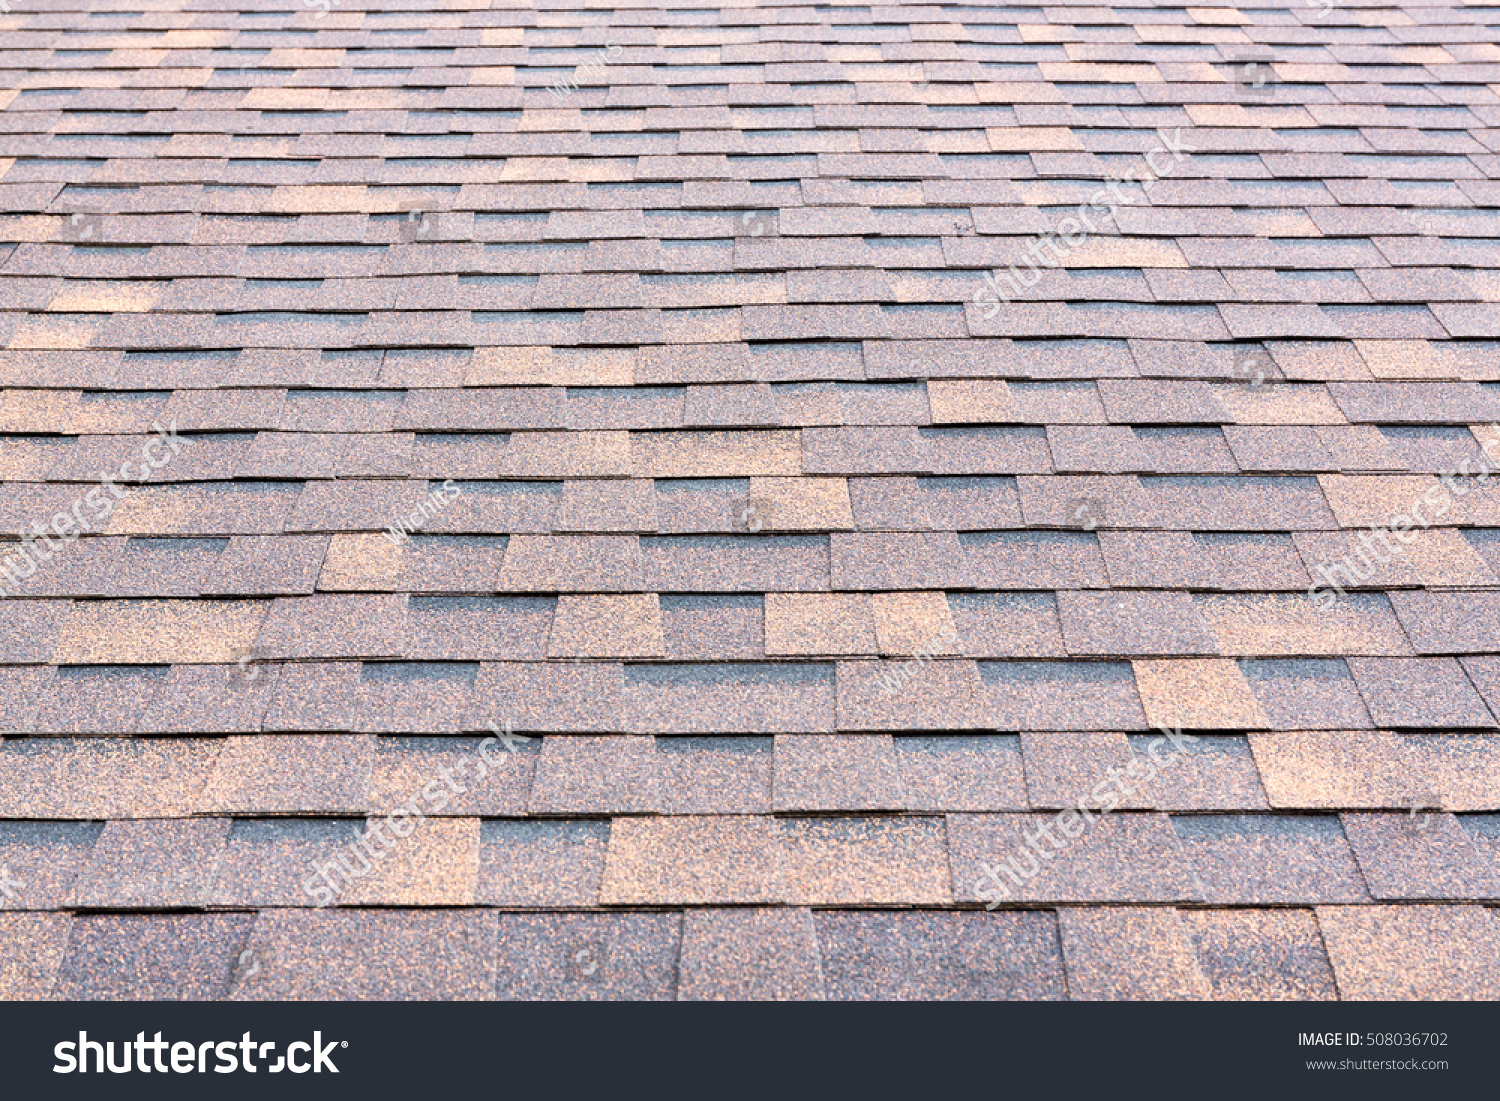 Close New Rubber Roof Tiles Stock Photo Edit Now 508036702